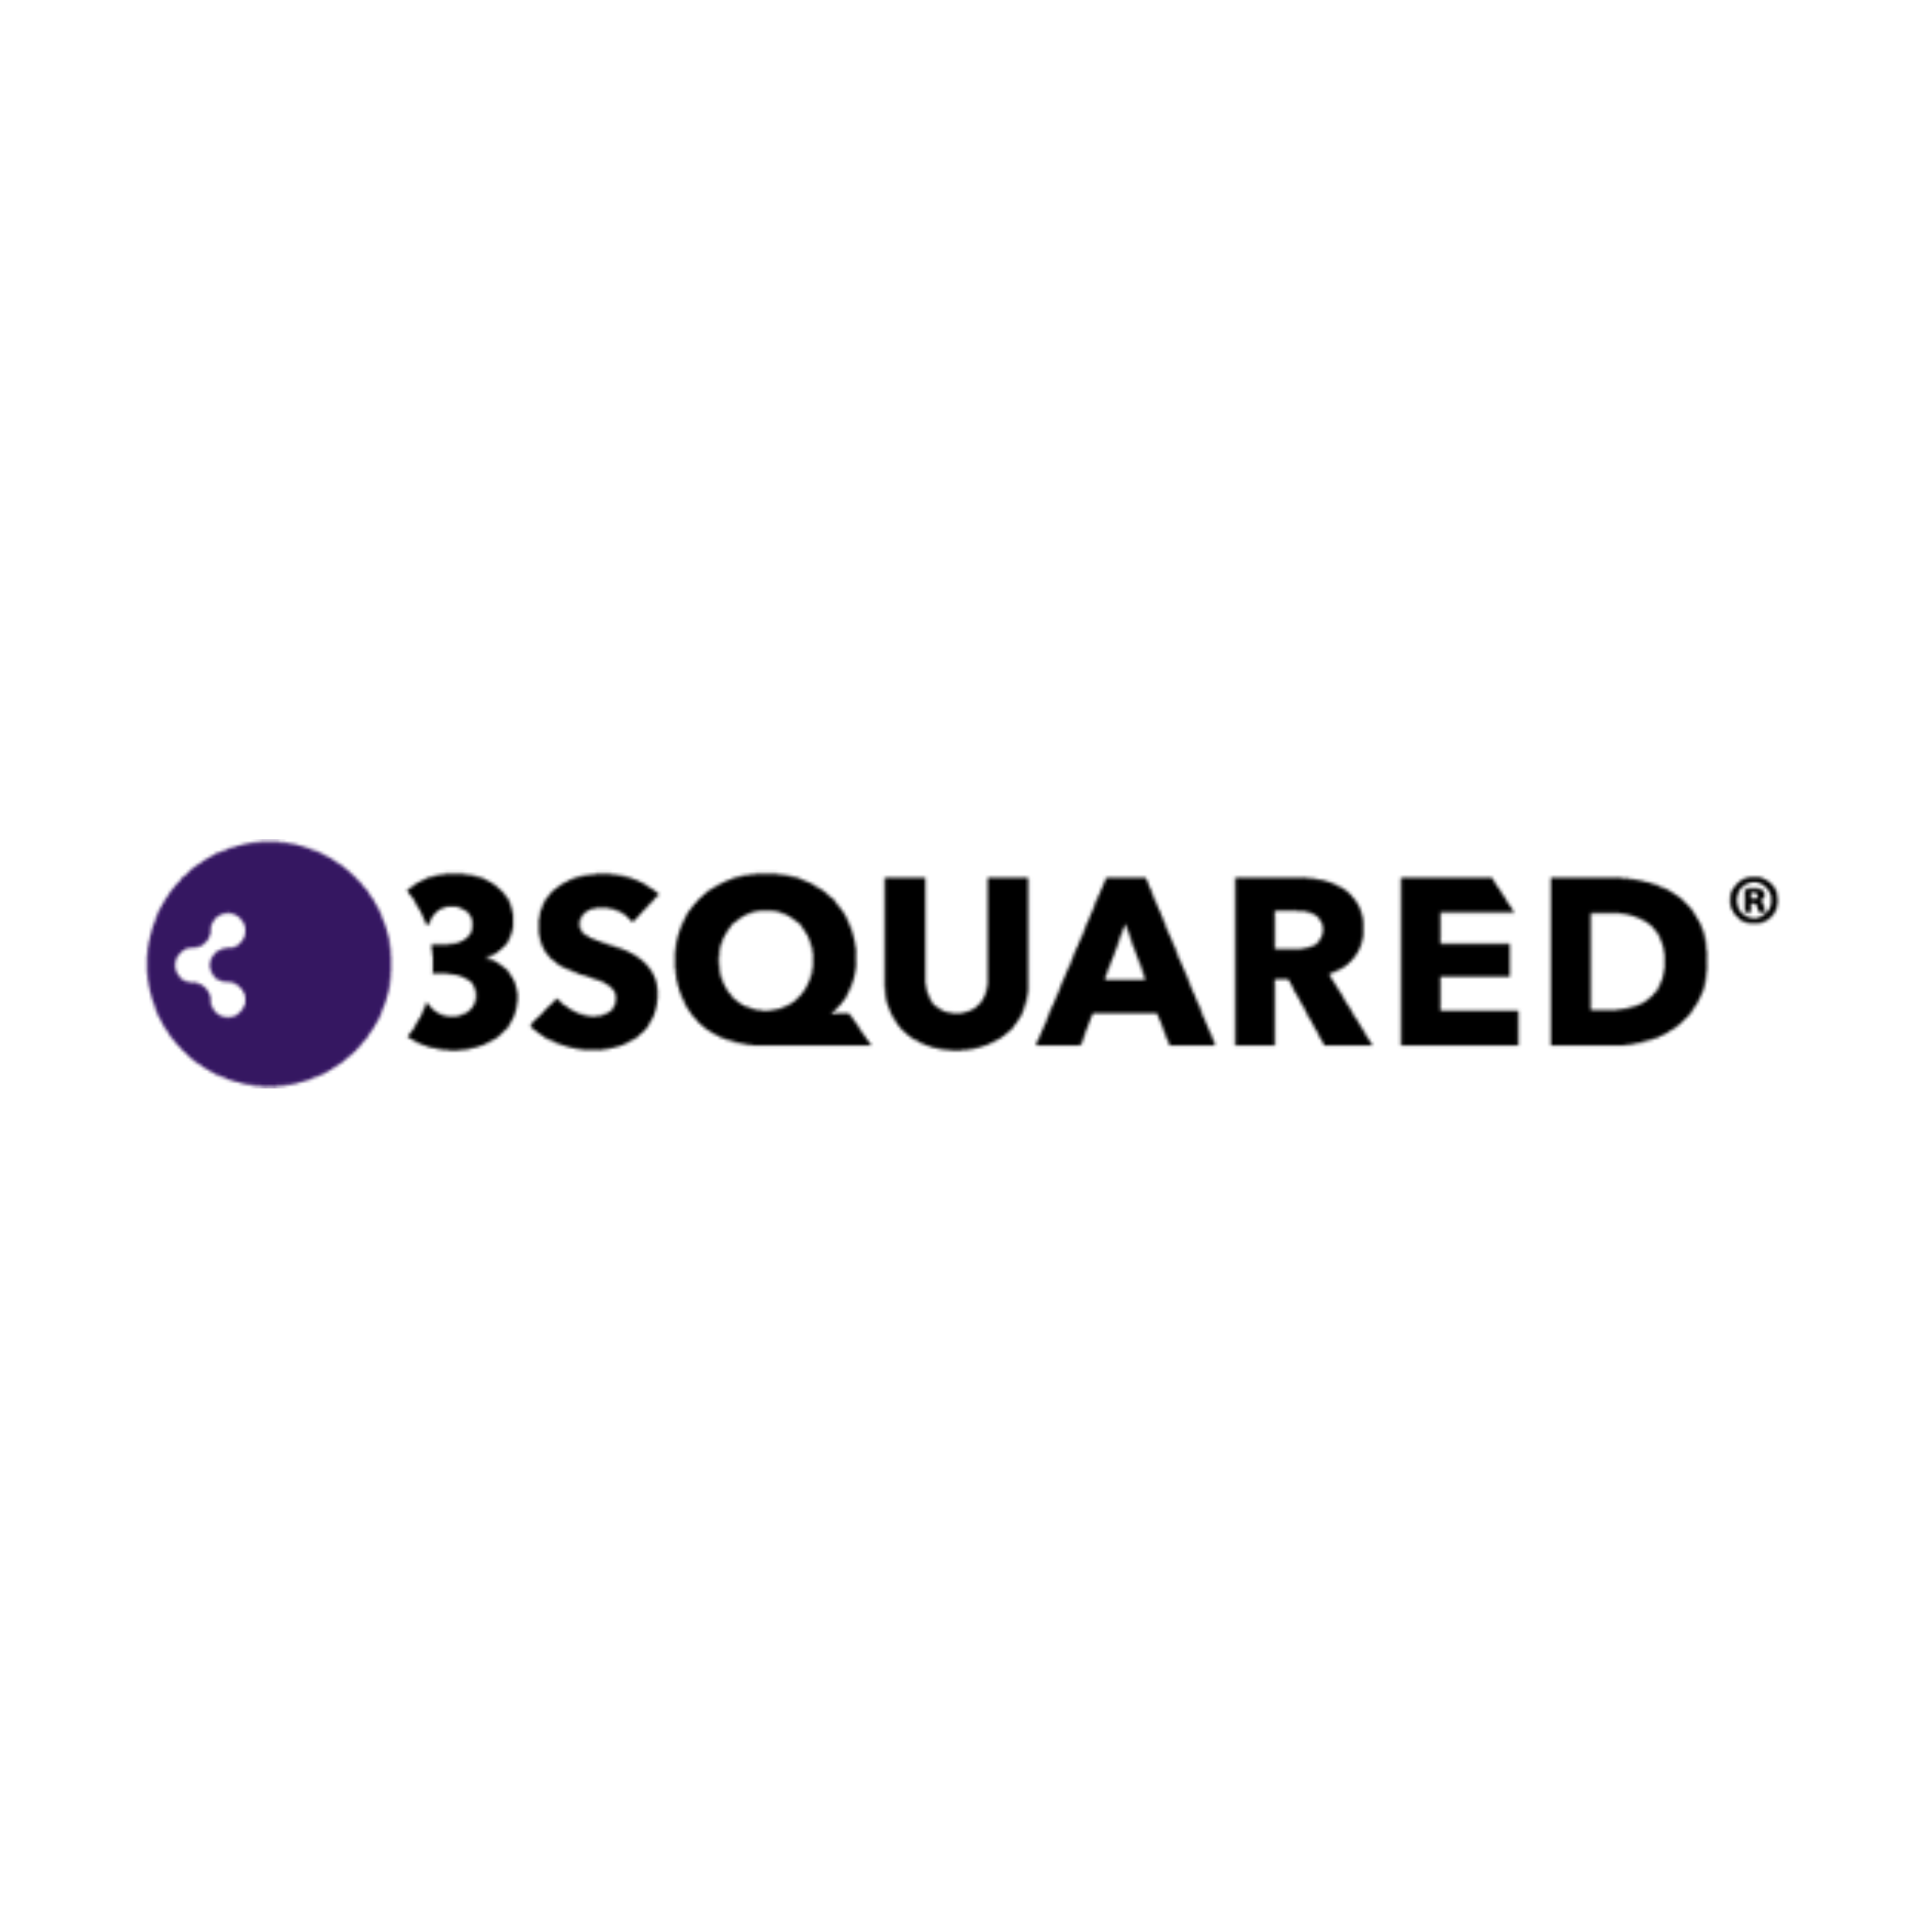 Sheffield-Based 3Squared Wins Industry Award for Growth